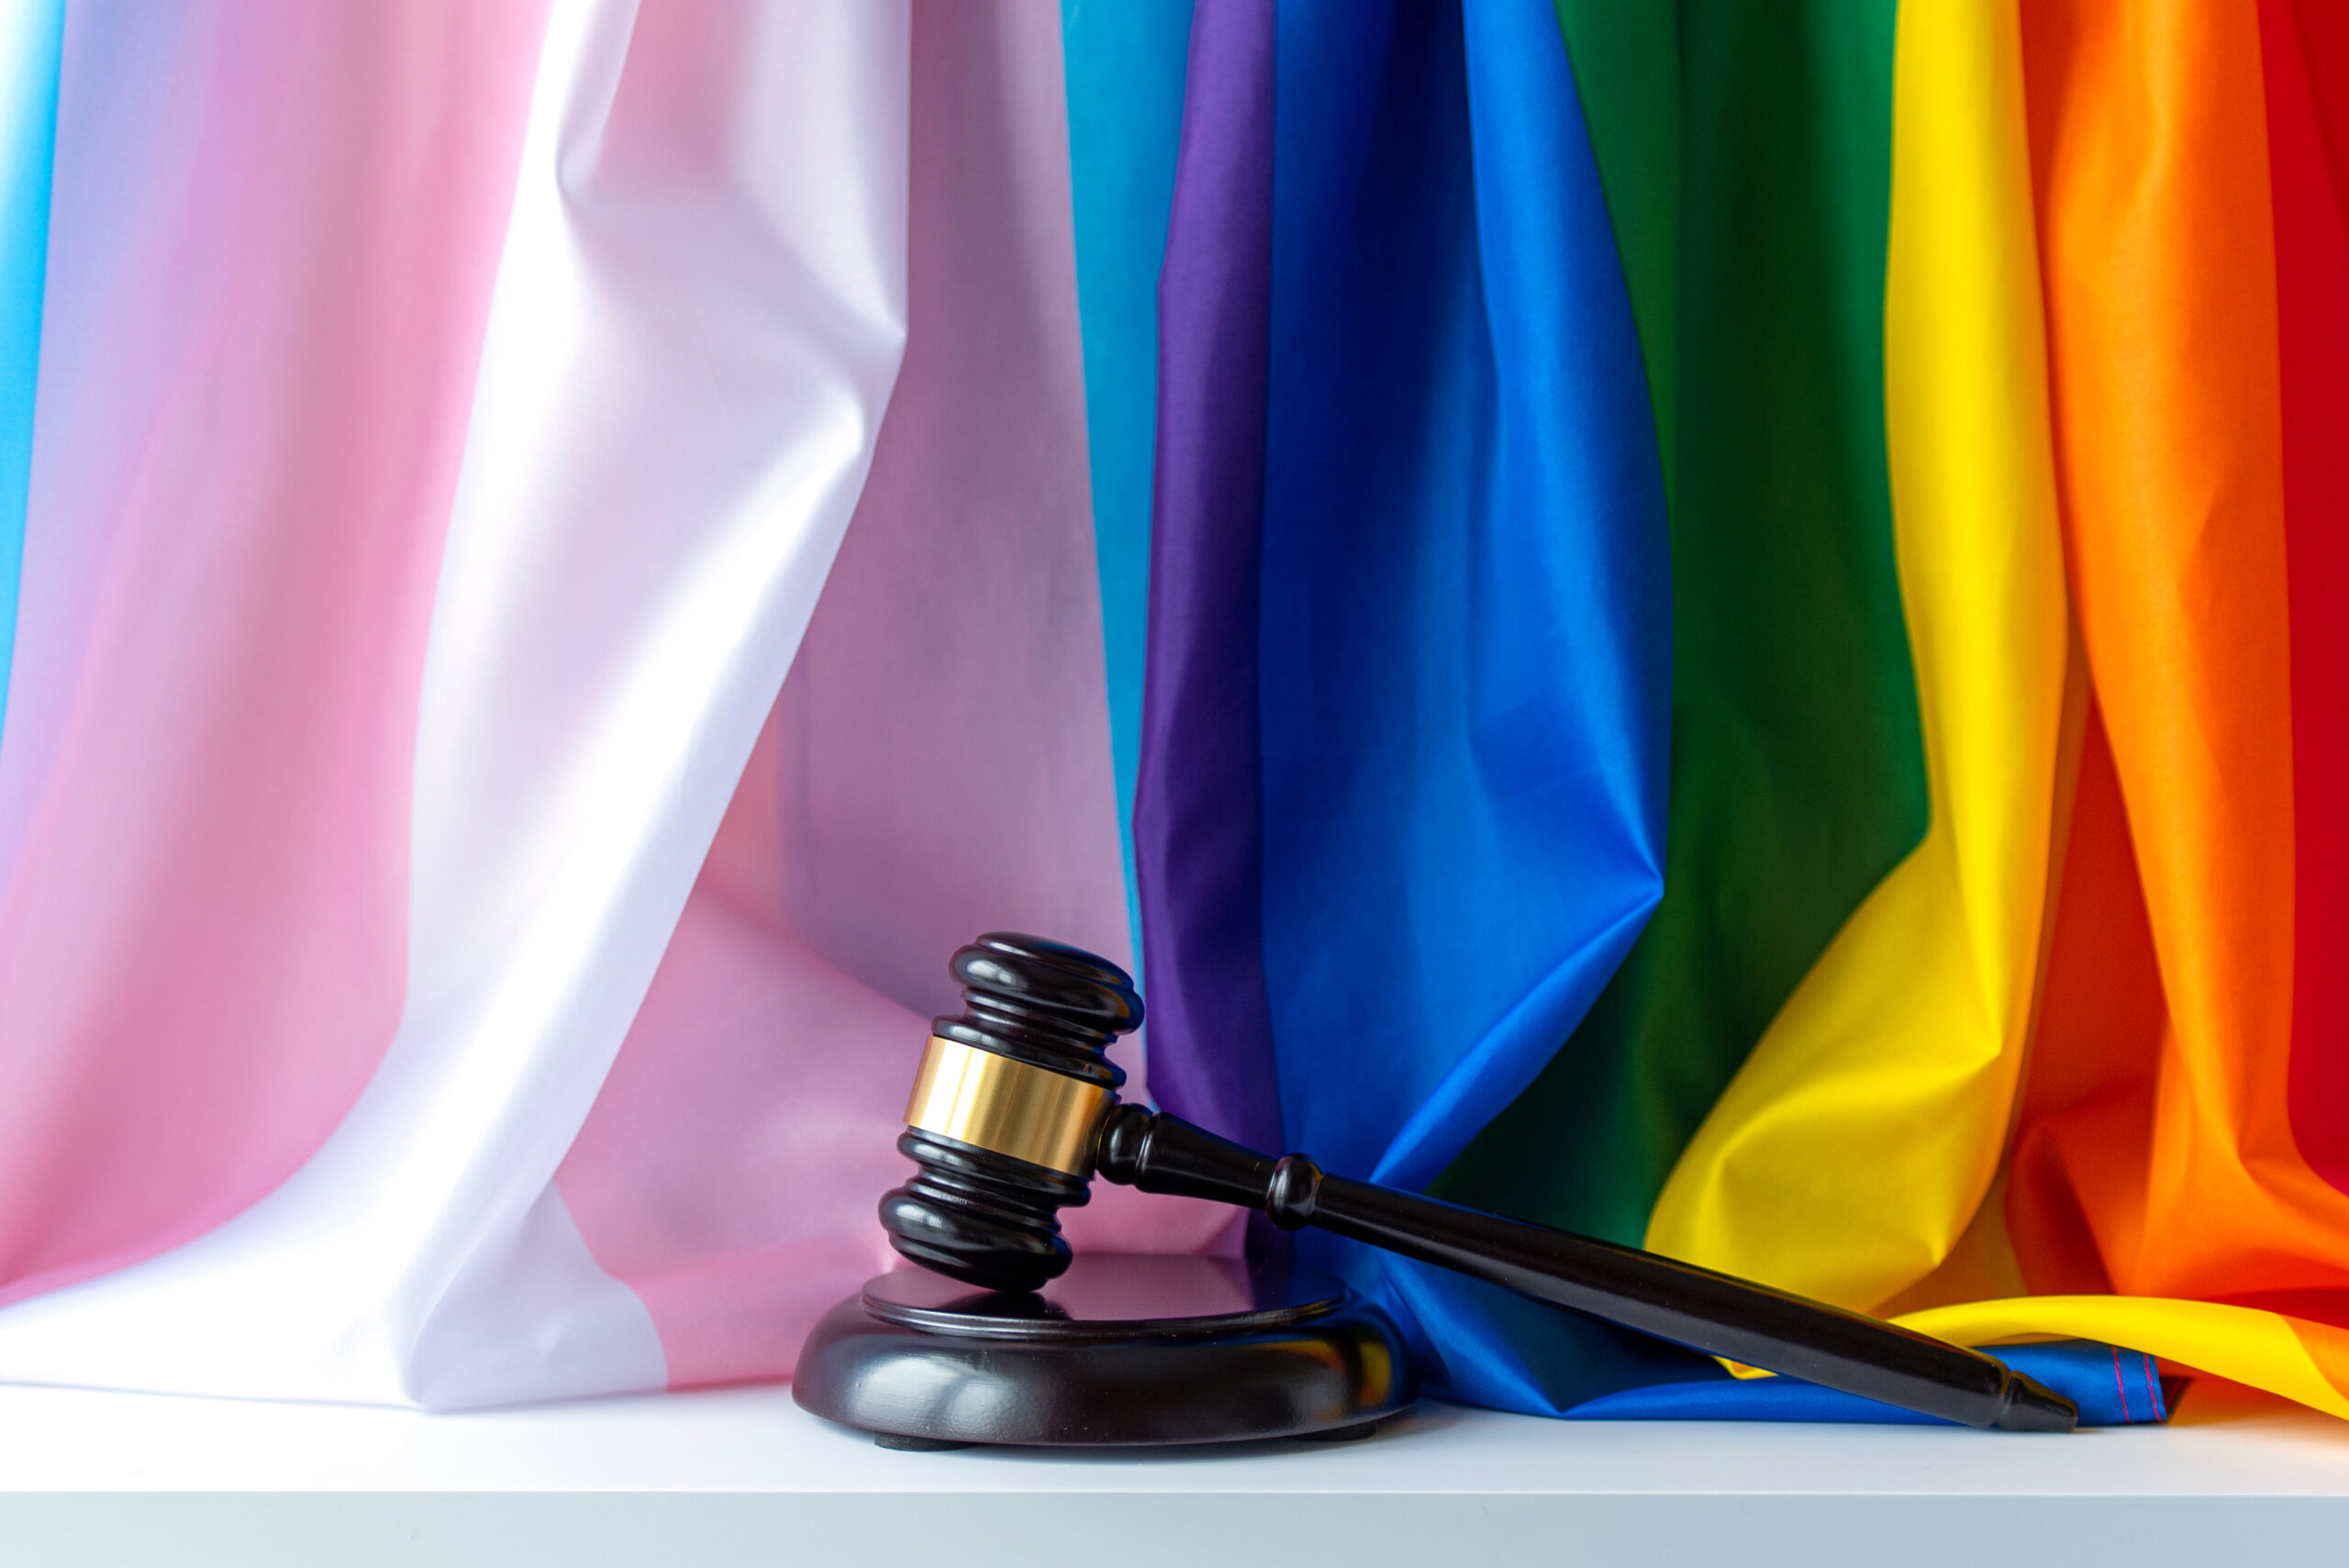 Diversity Law: A Half Century of Changing Attitudes on LGBTQI Rights in Connecticut